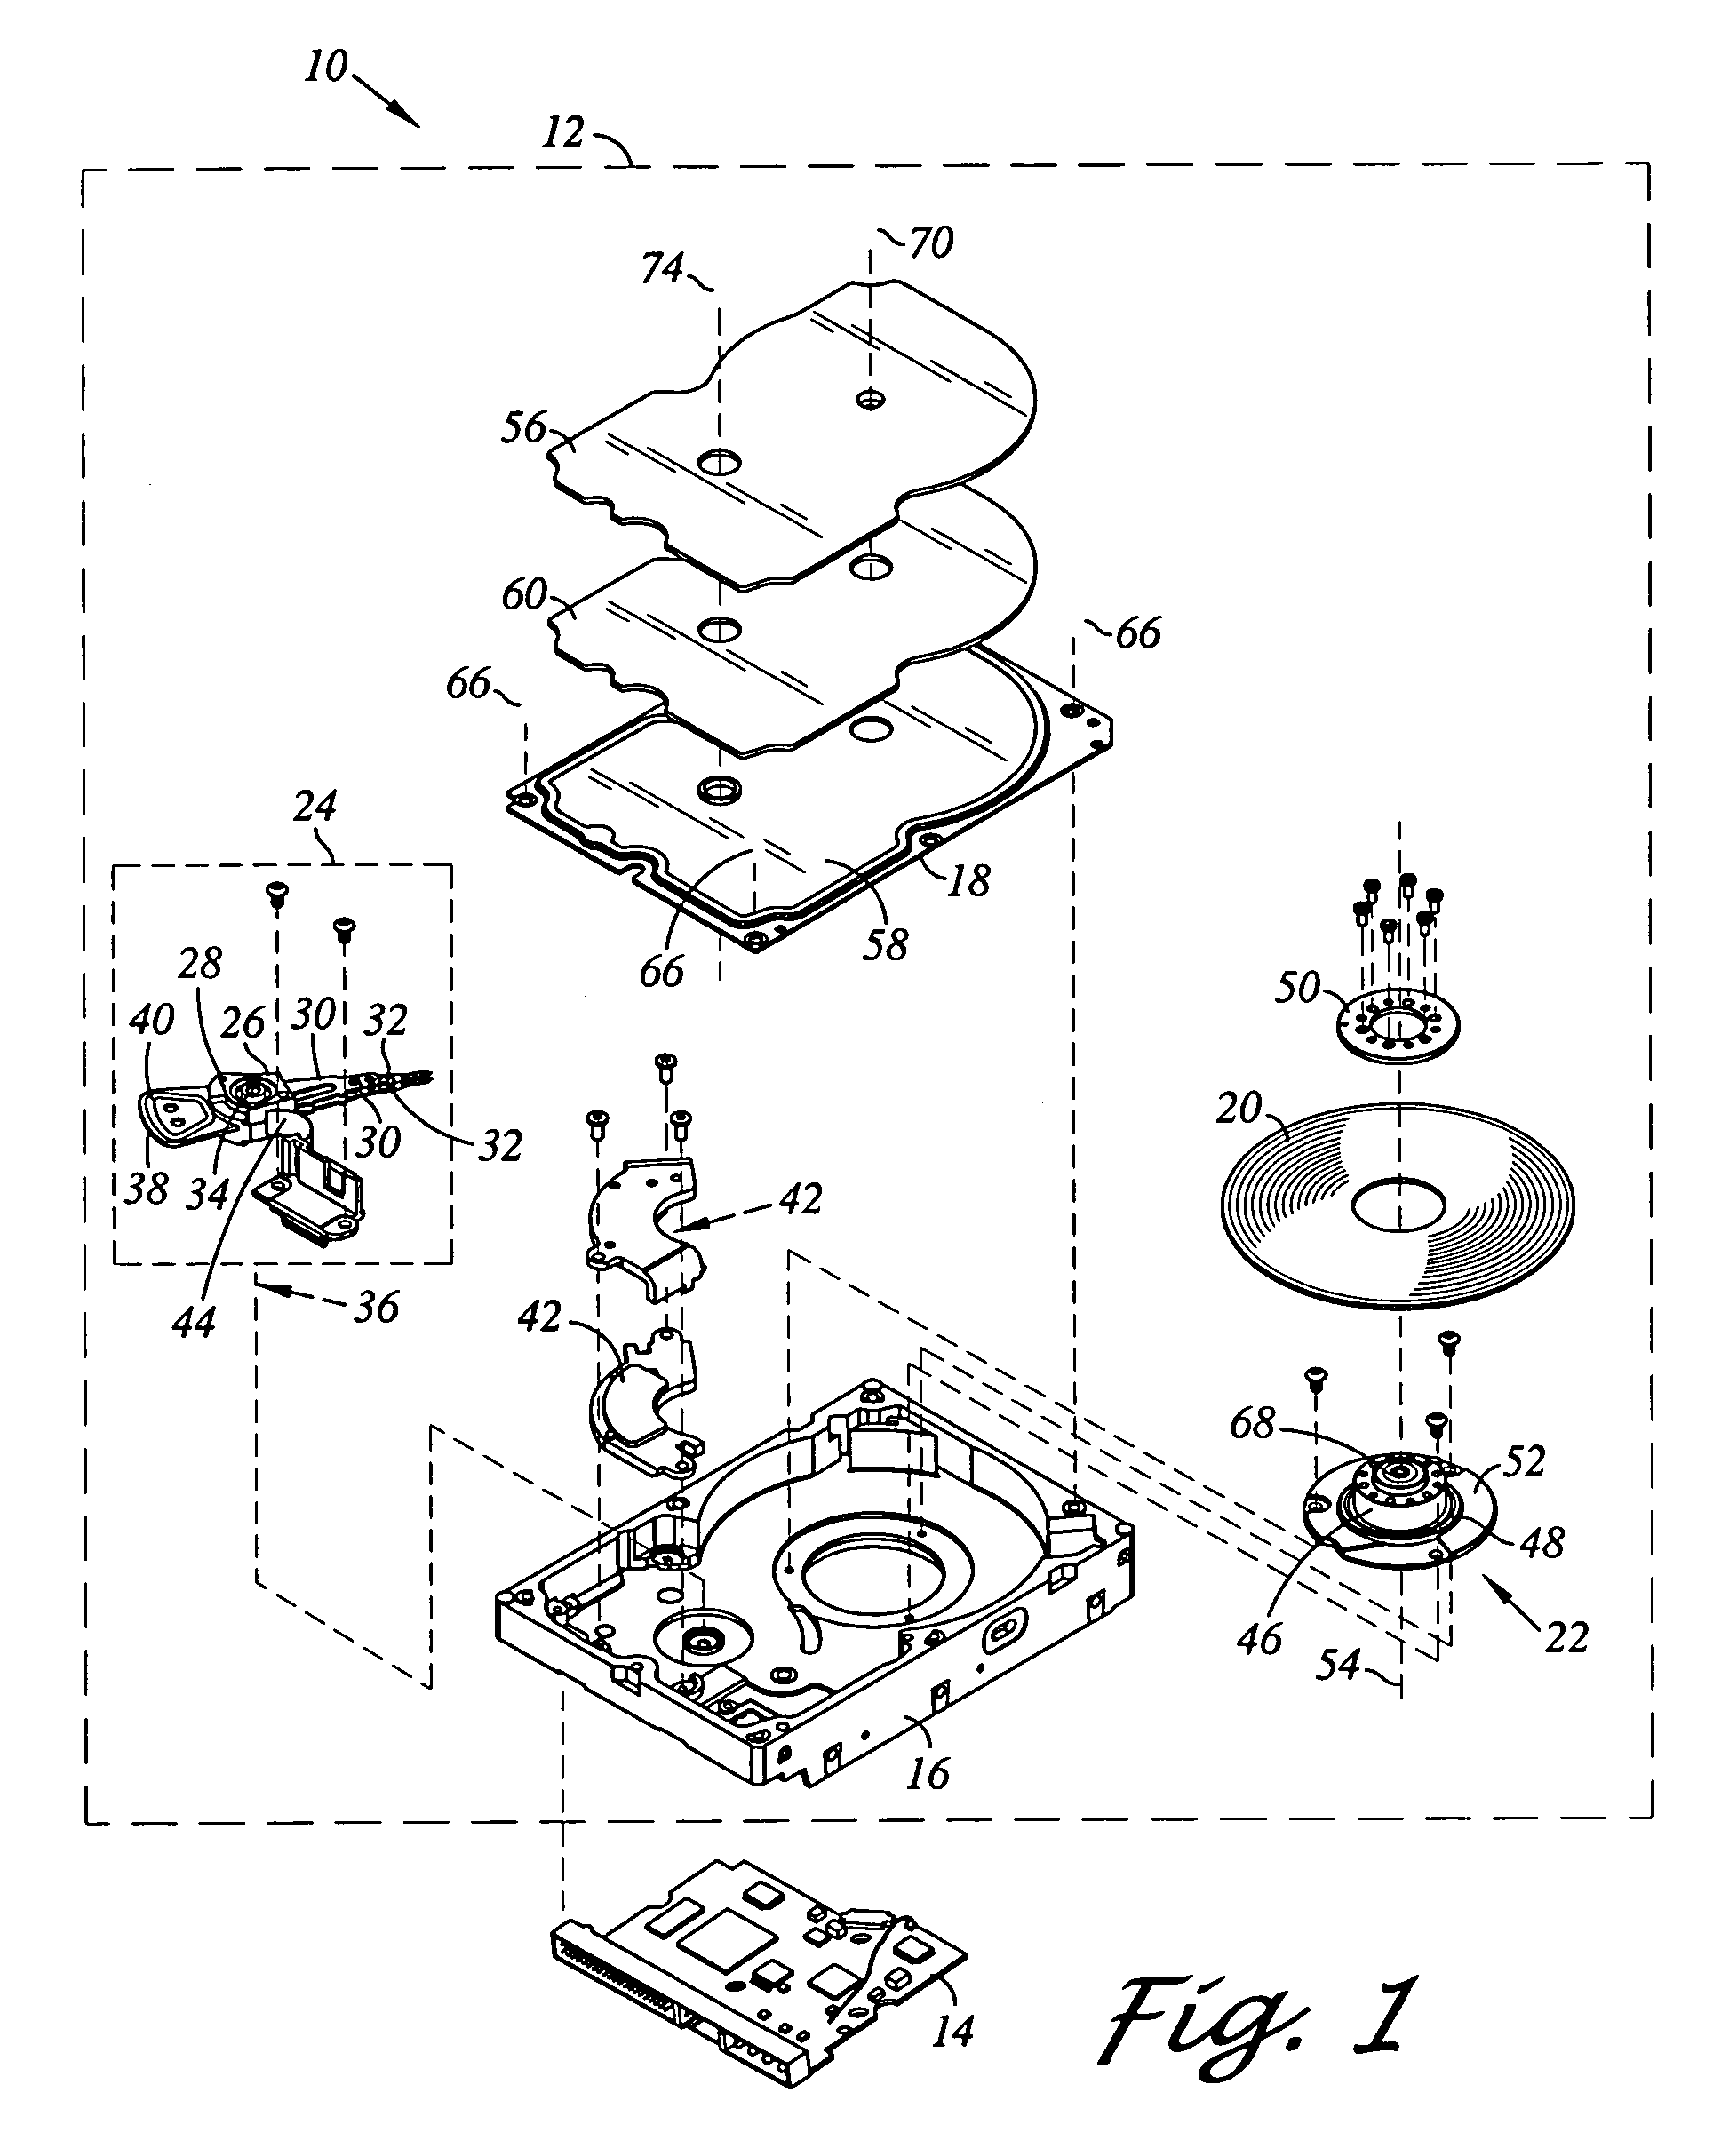 Disk drive including a spindle motor and a pivot bearing cartridge attached to different layers of a laminated cover